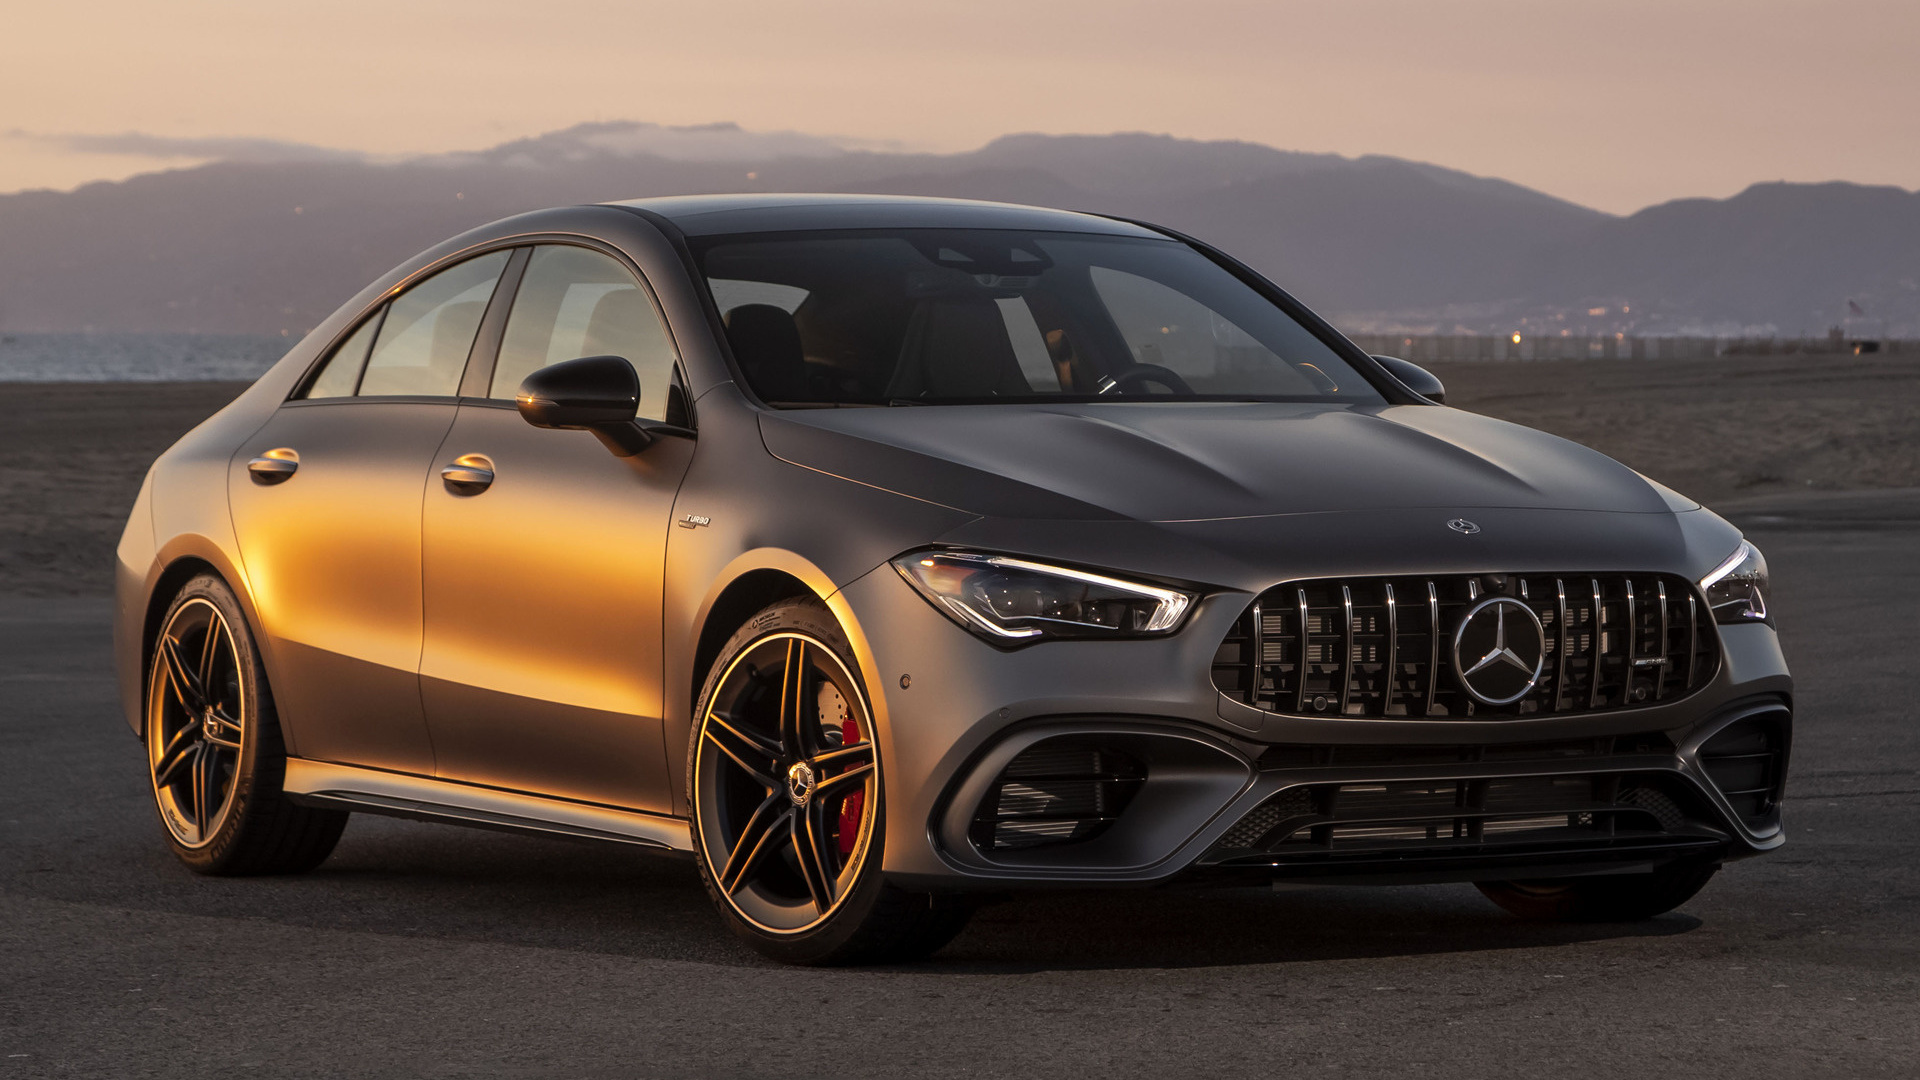 2020 Mercedes-AMG CLA 45 (US) - Wallpapers and HD Images | Car Pixel